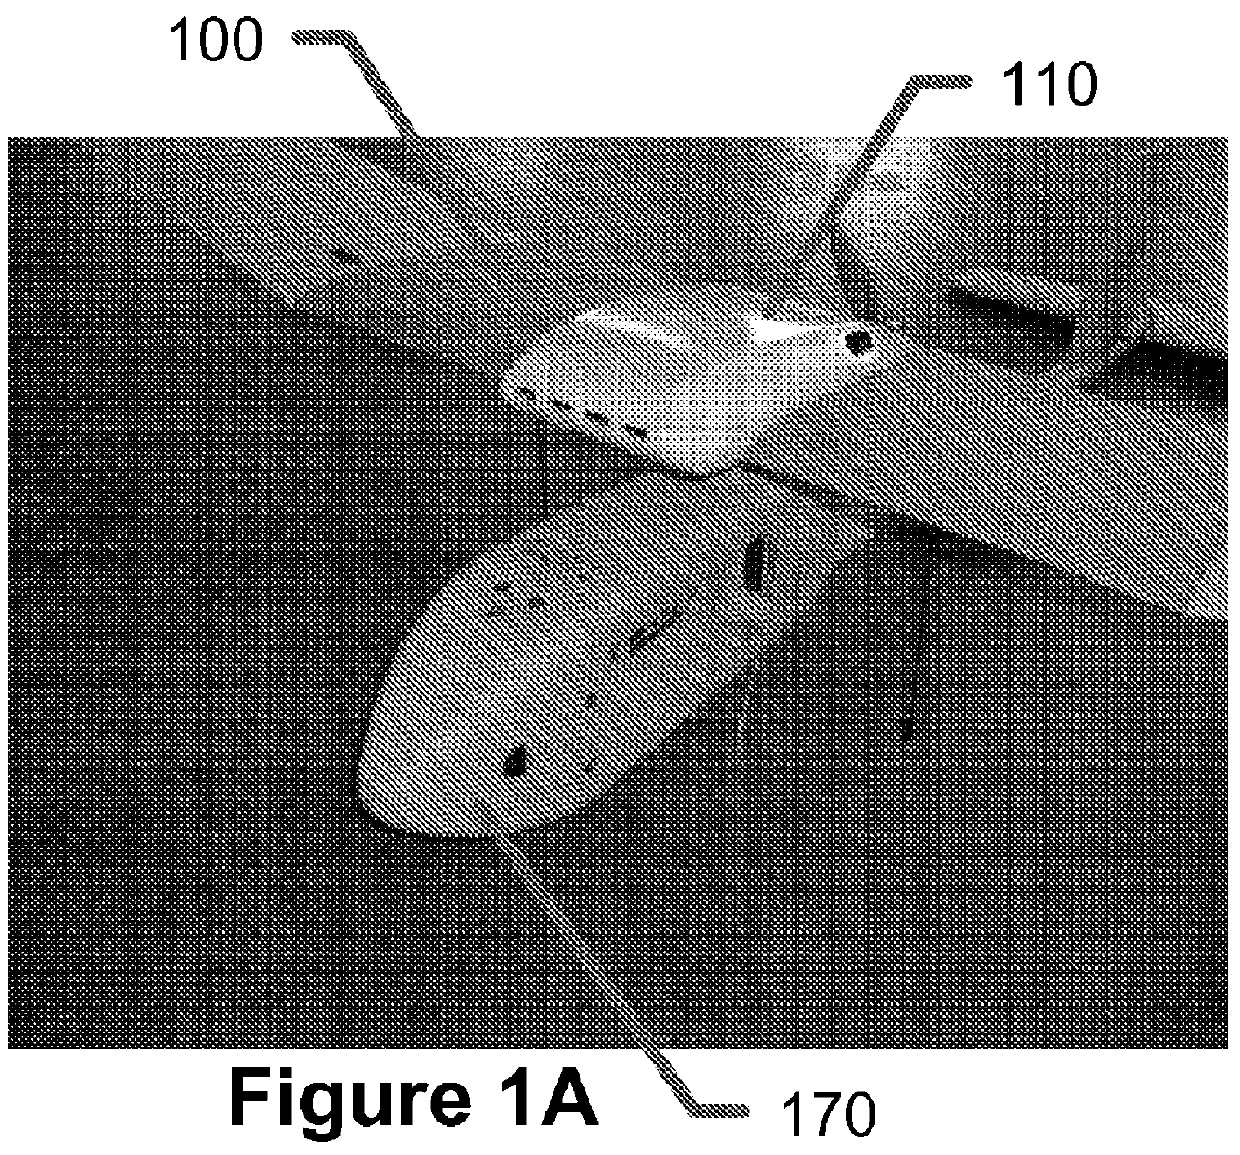 Devices, systems and methods for modular payload integration for unmanned aerial vehicles